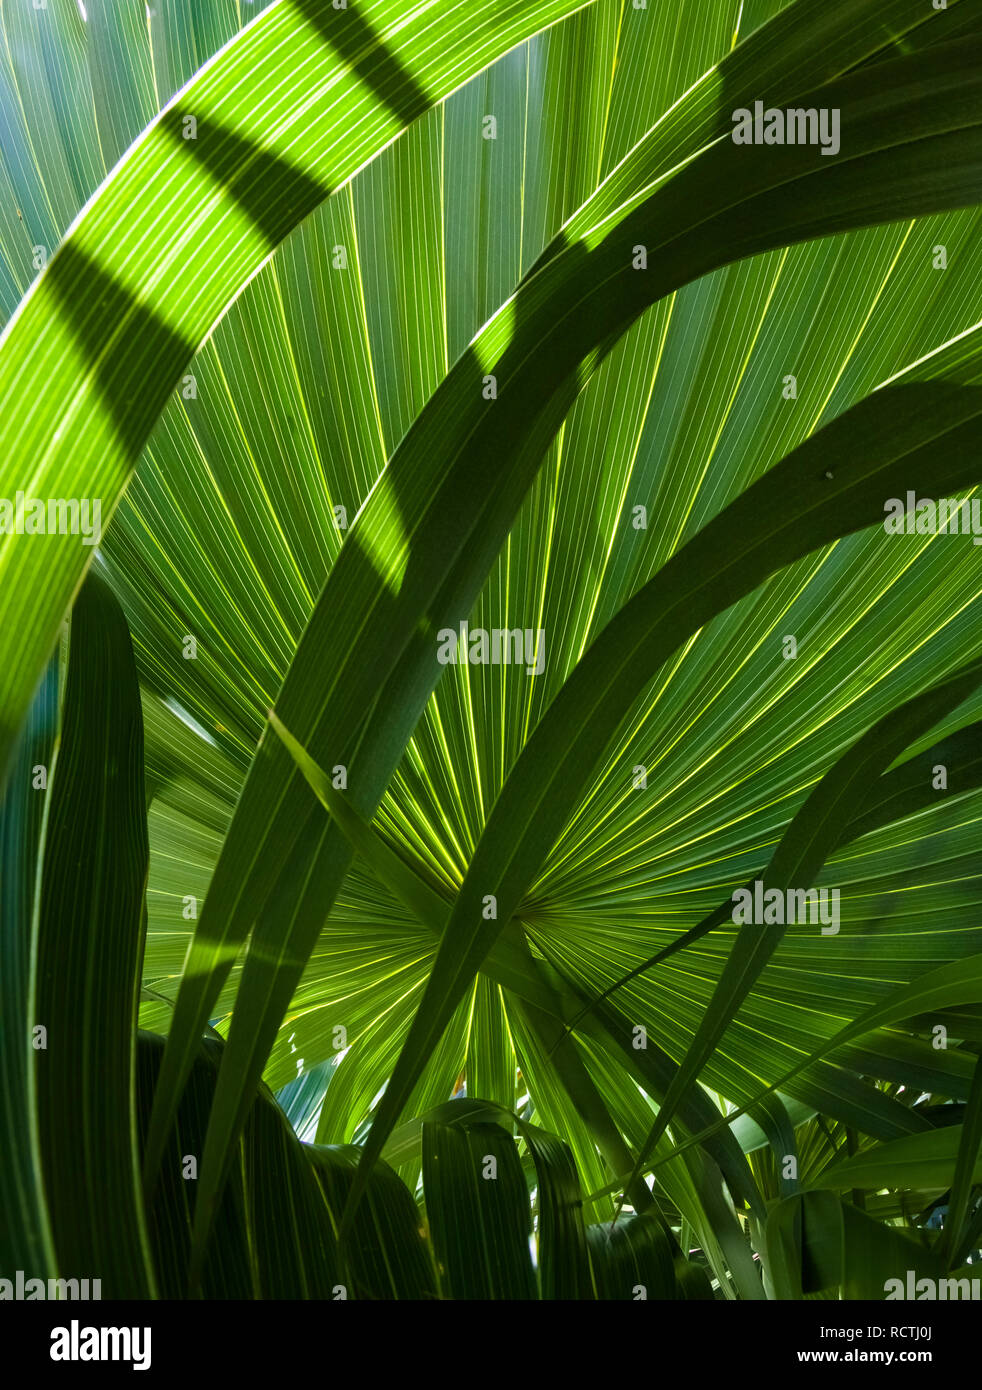 Closeup of green palm fronds Stock Photo